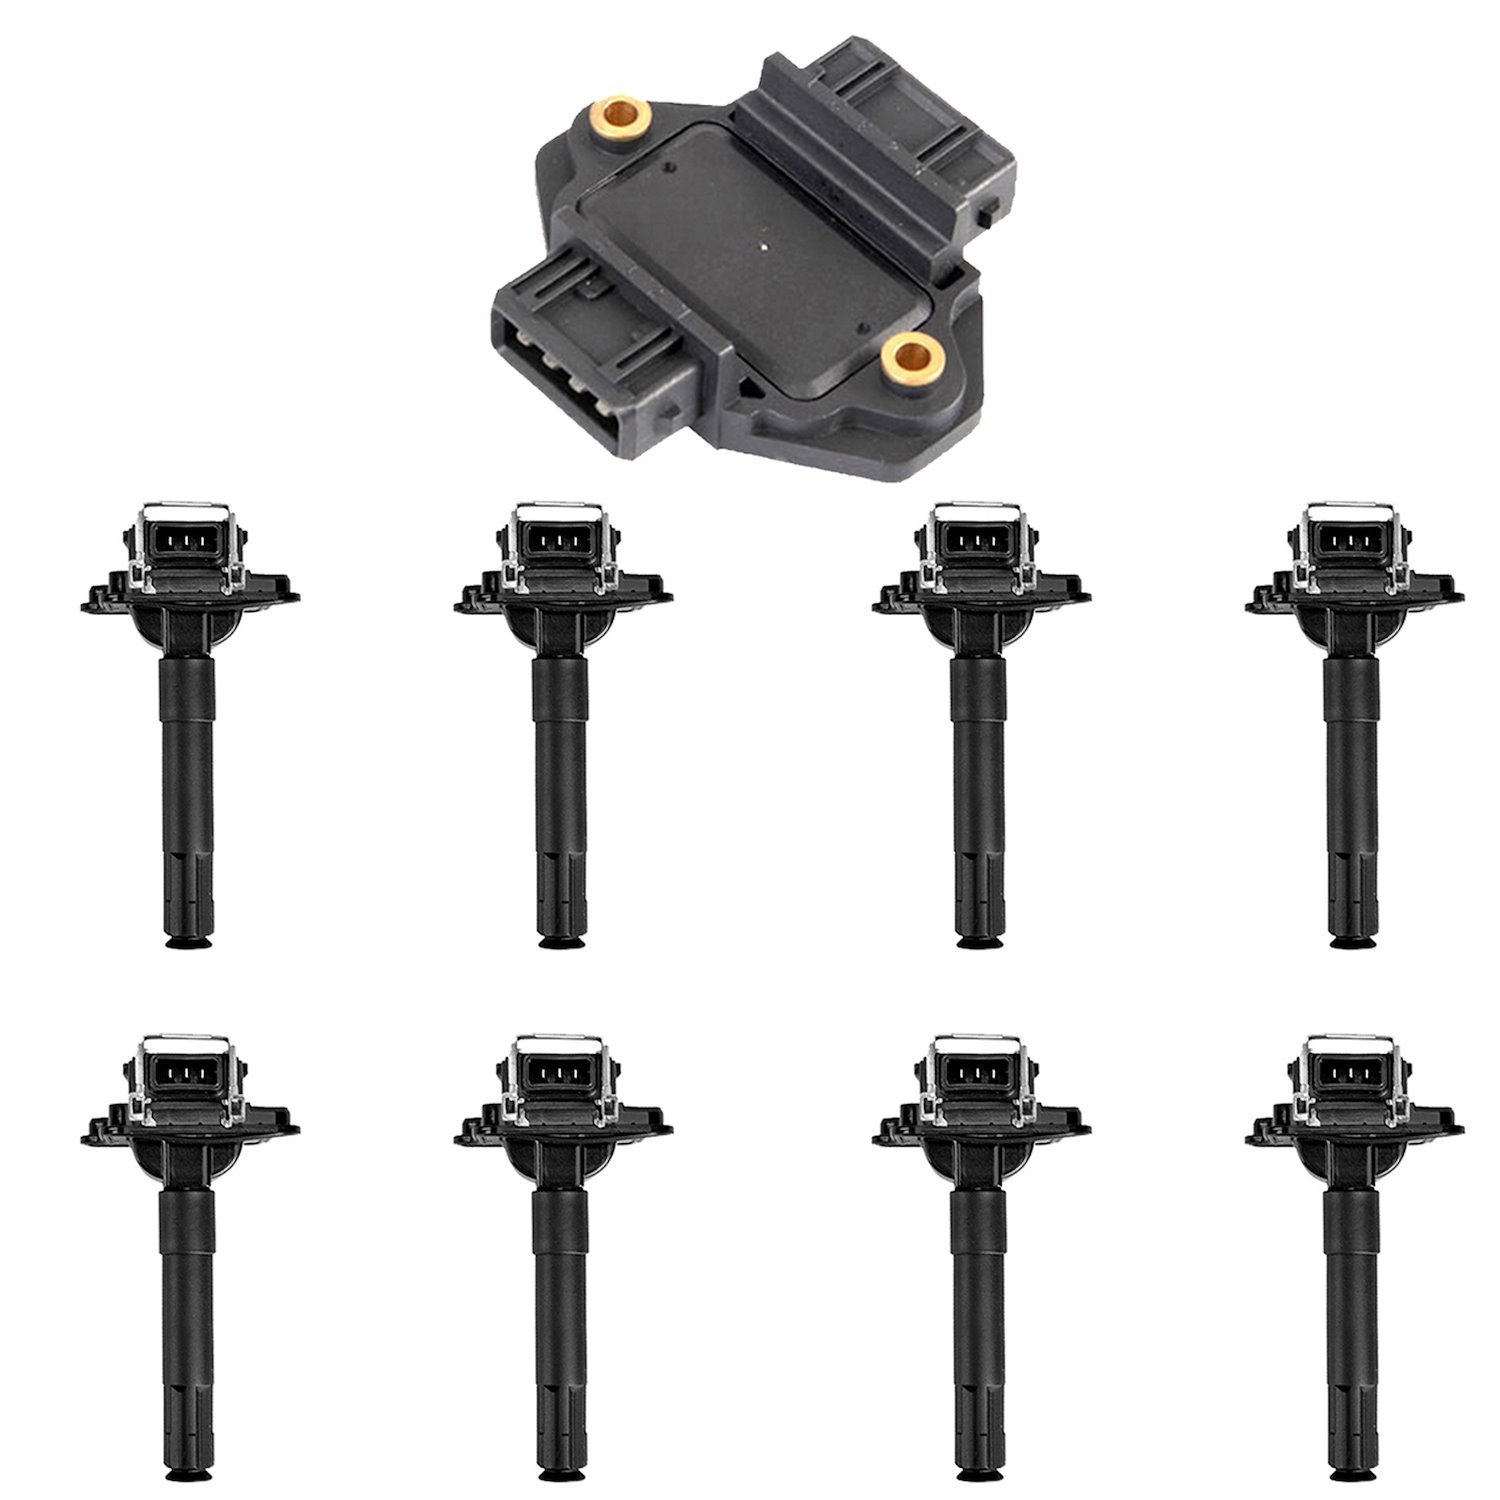 OE Replacement Ignition Coil and Ignition Module Kit, 1998-2002 Volkswagen Passat, 1998-2002 Audi A4/A6/A8 Quattro